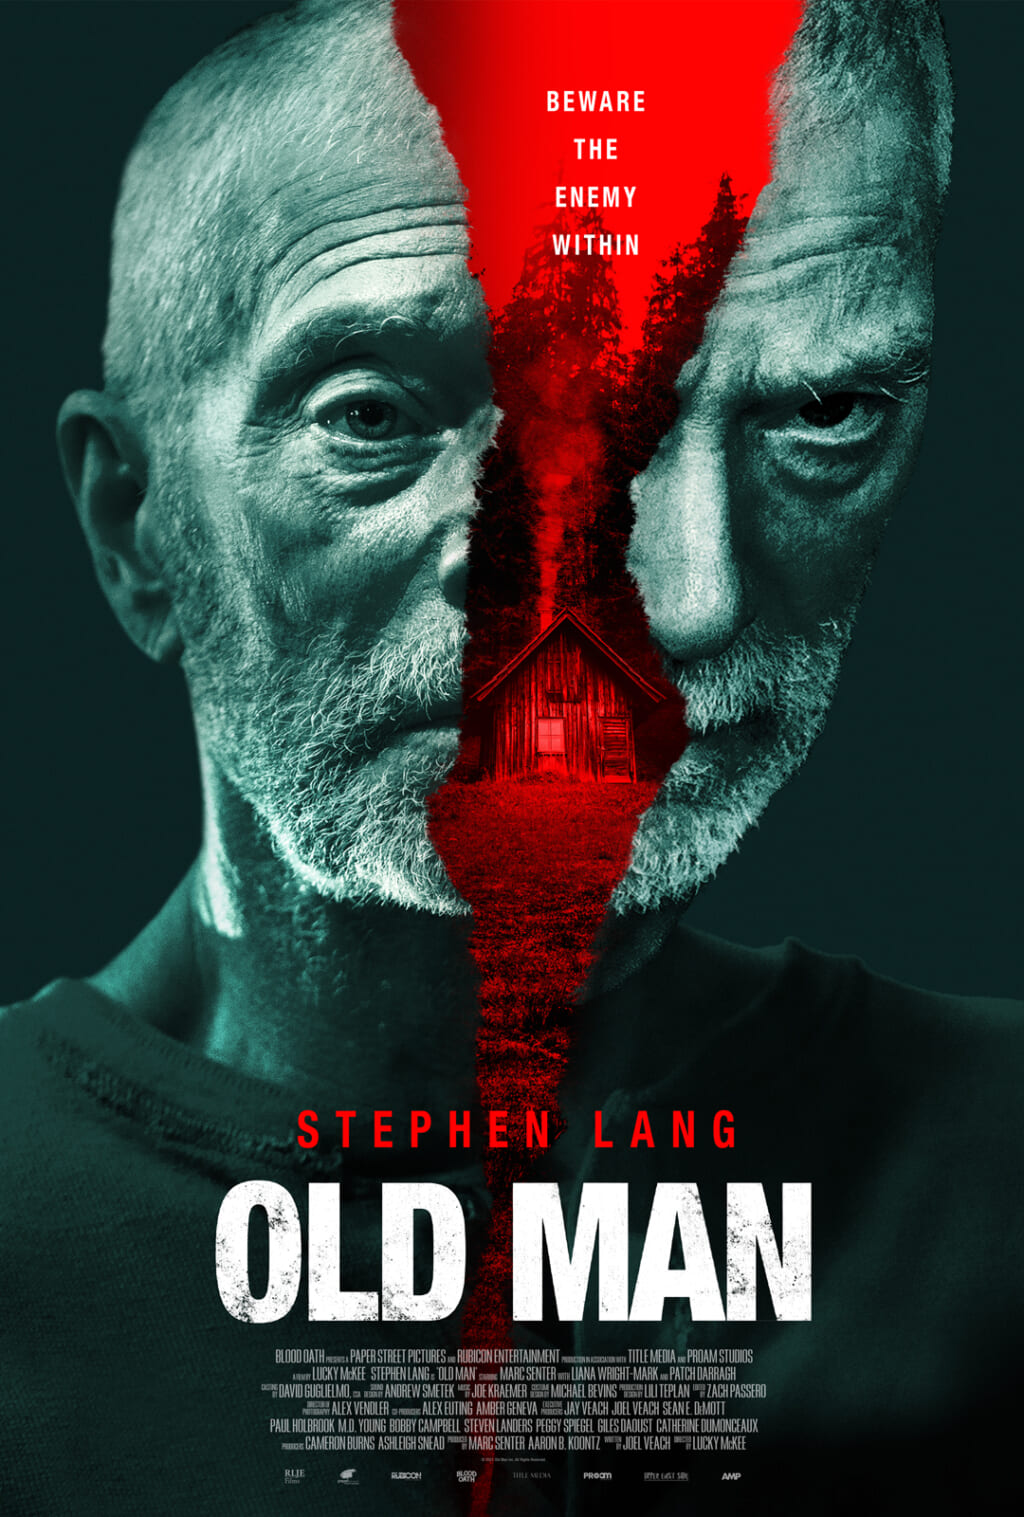 OldMan 1080X1600 THT 1024x1517 - 'Old Man' Trailer: 'Don't Breathe' Star Stephen Lang and 'May' Director Lucky McGee Team Up for Brutal Thriller